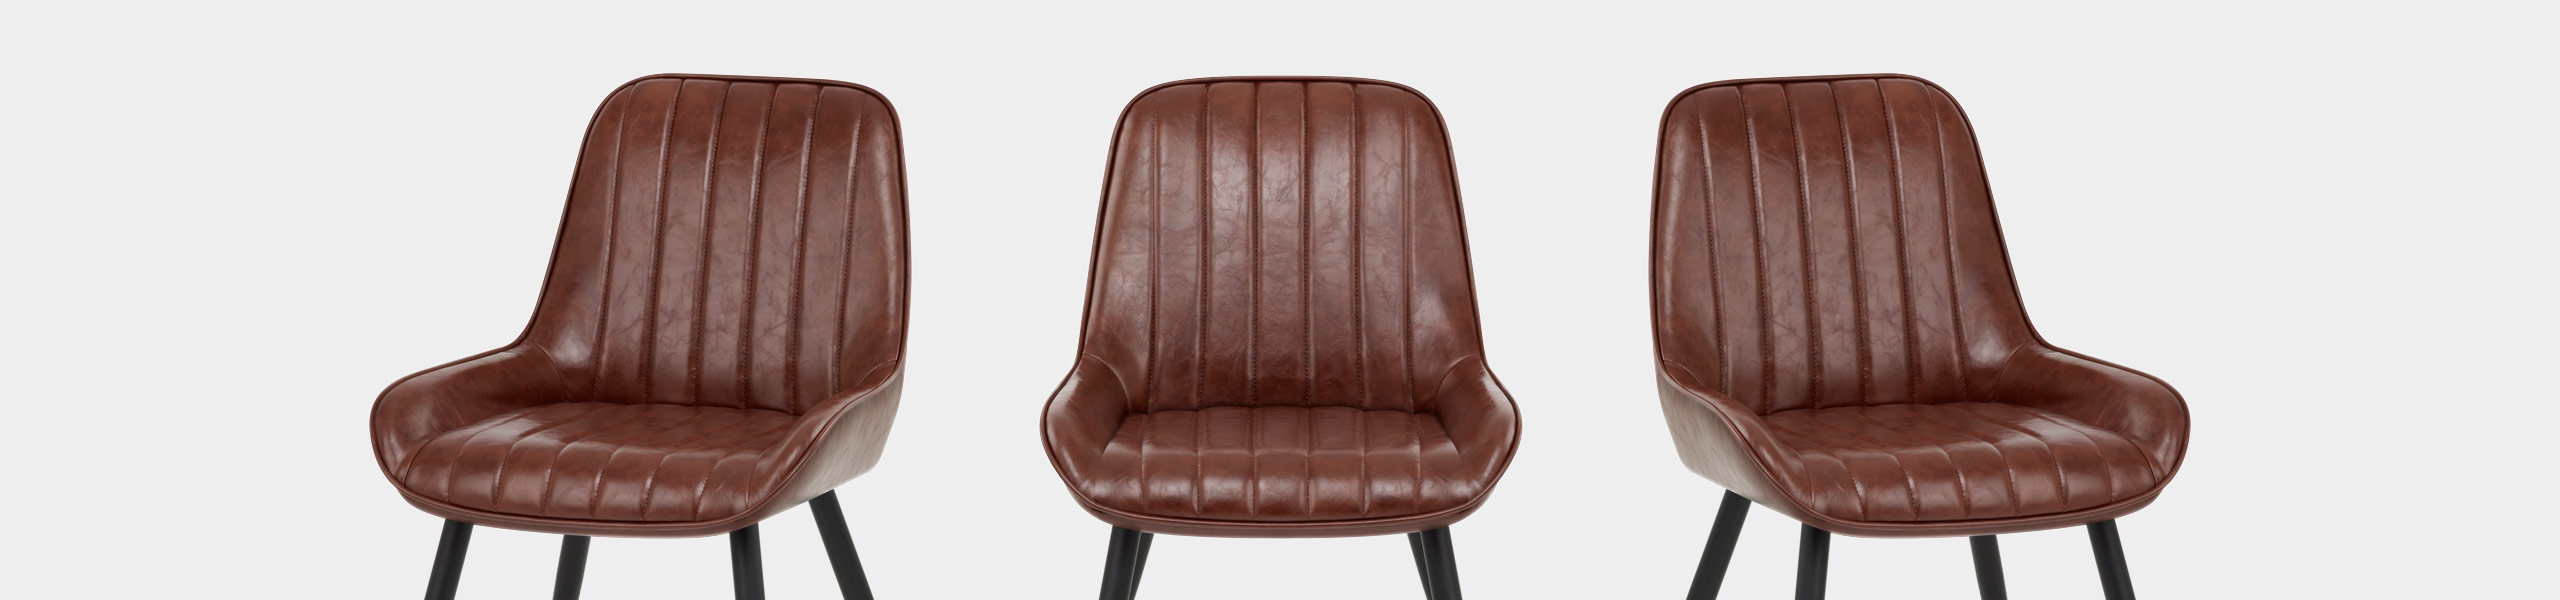 Mustang Chair Antique Brown Video Banner